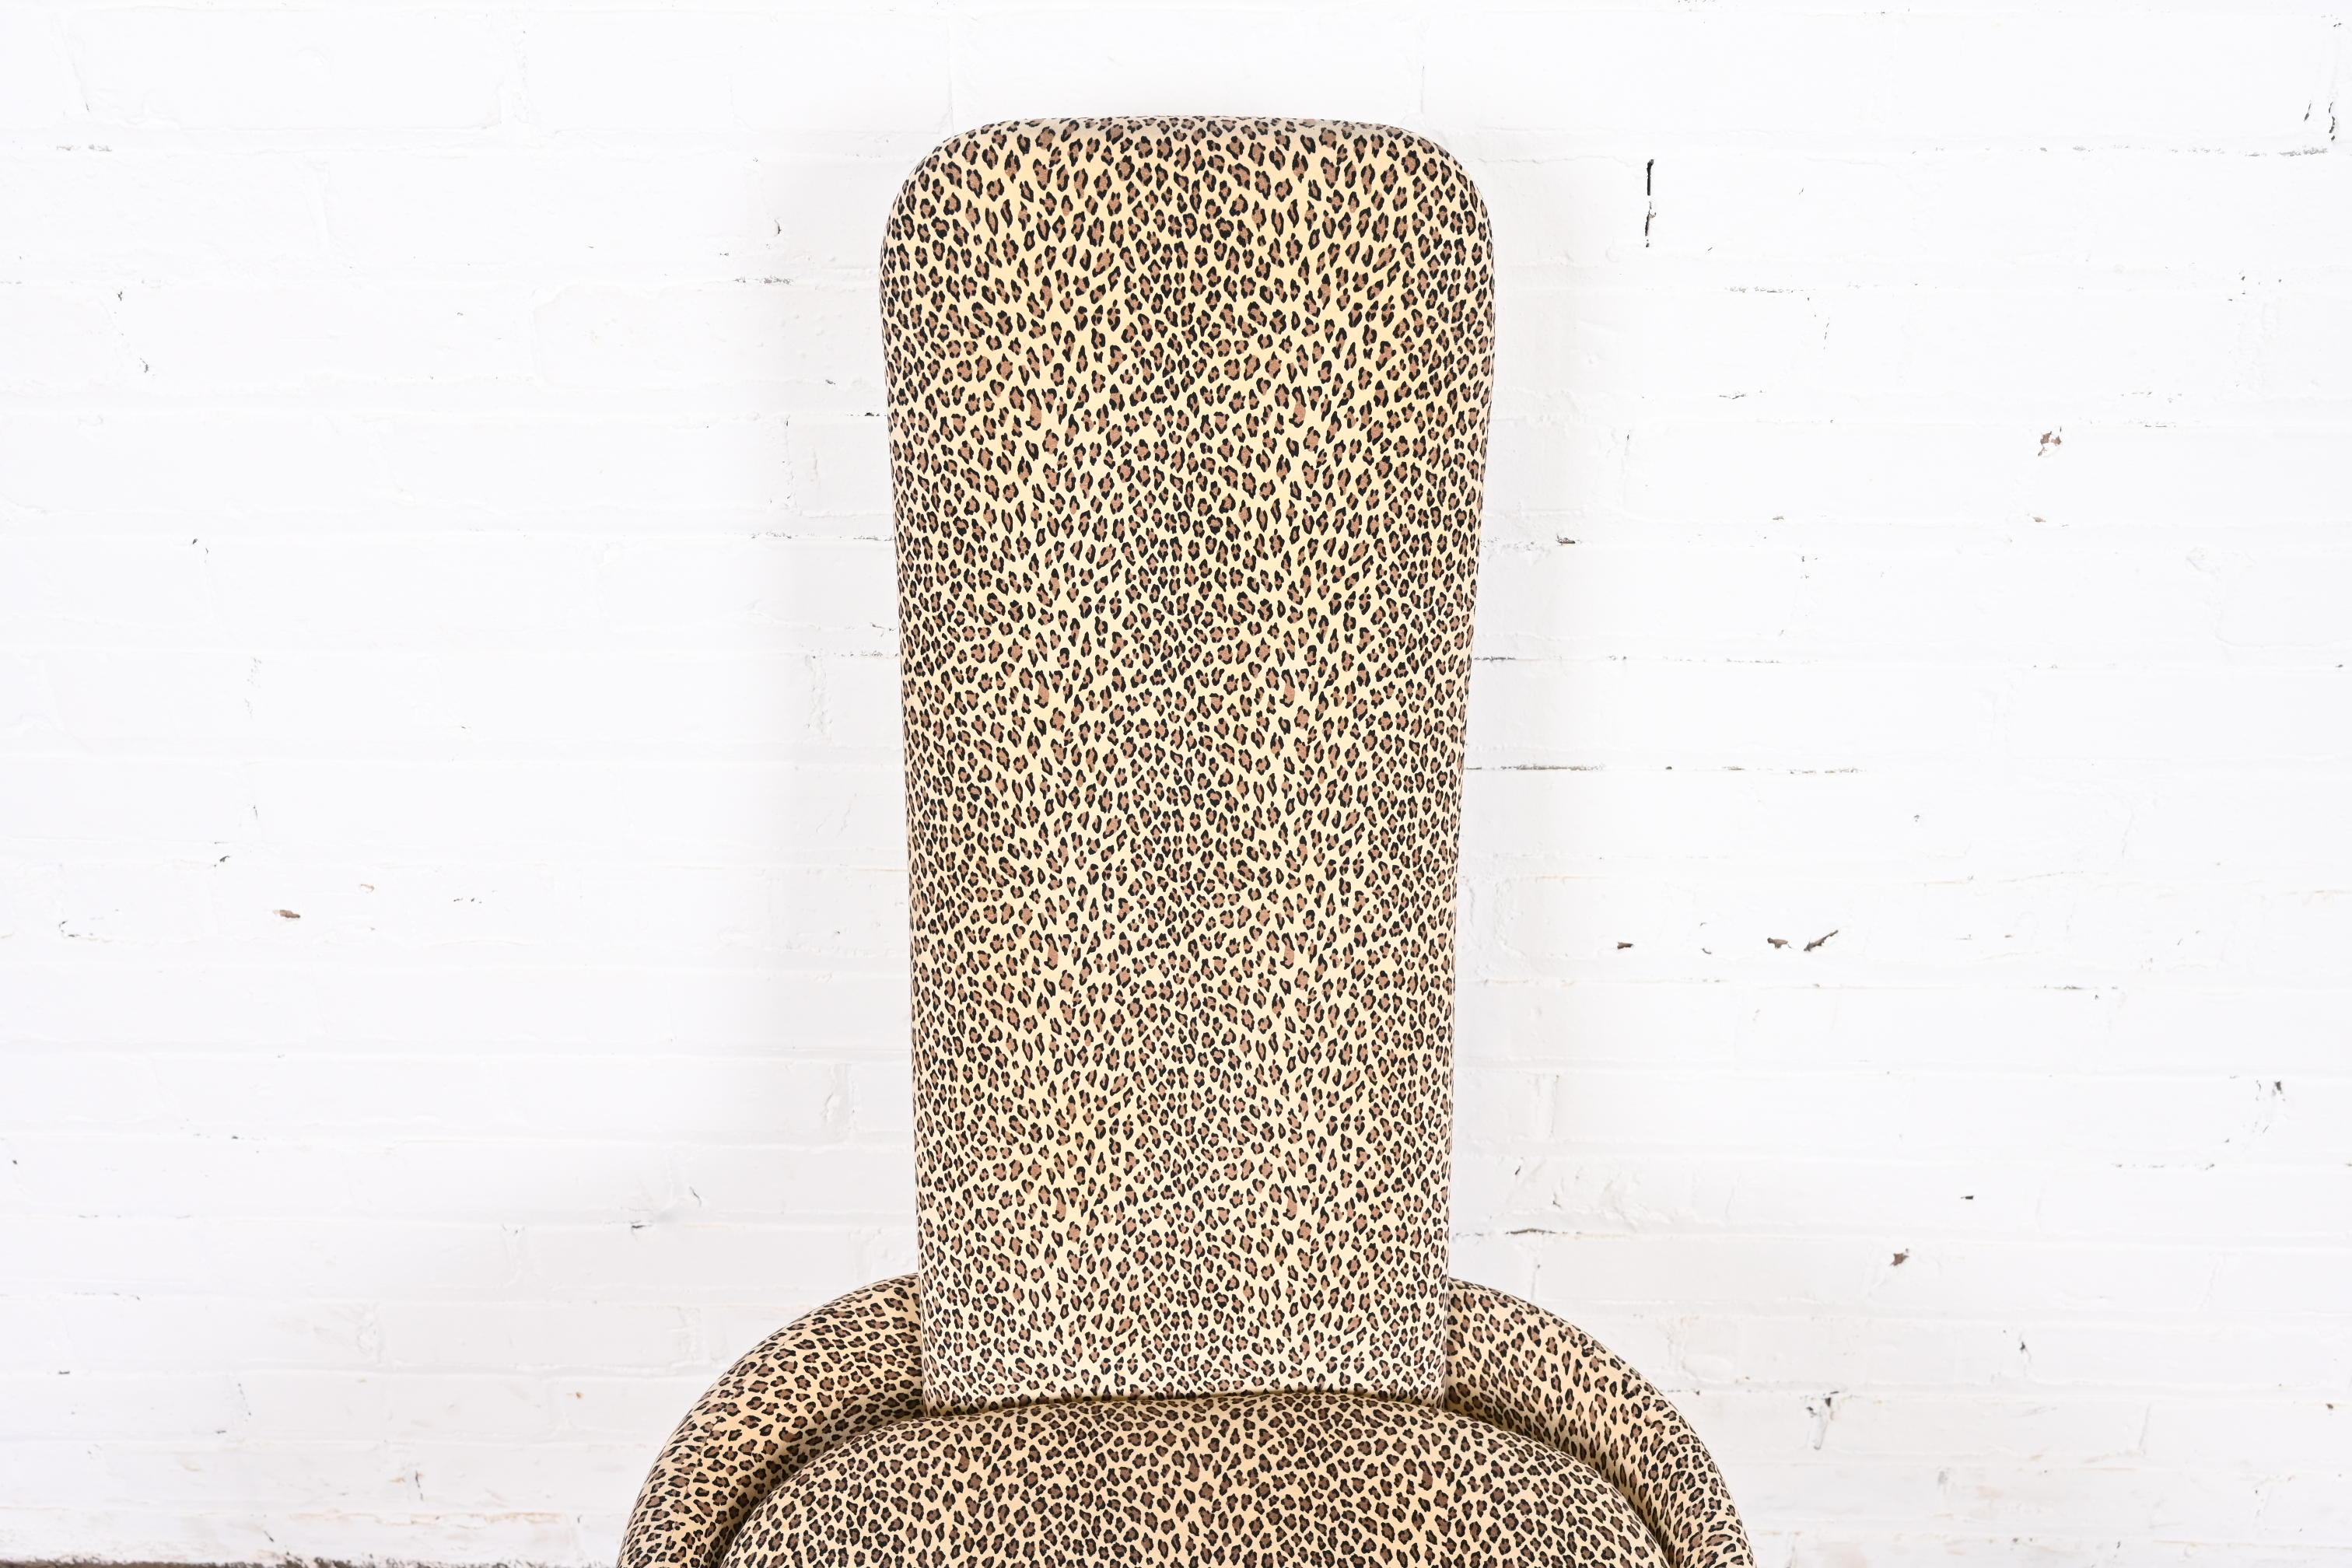 Pierre Cardin Leopard Print Upholstered High Back Dining Chairs, Set of Six For Sale 1